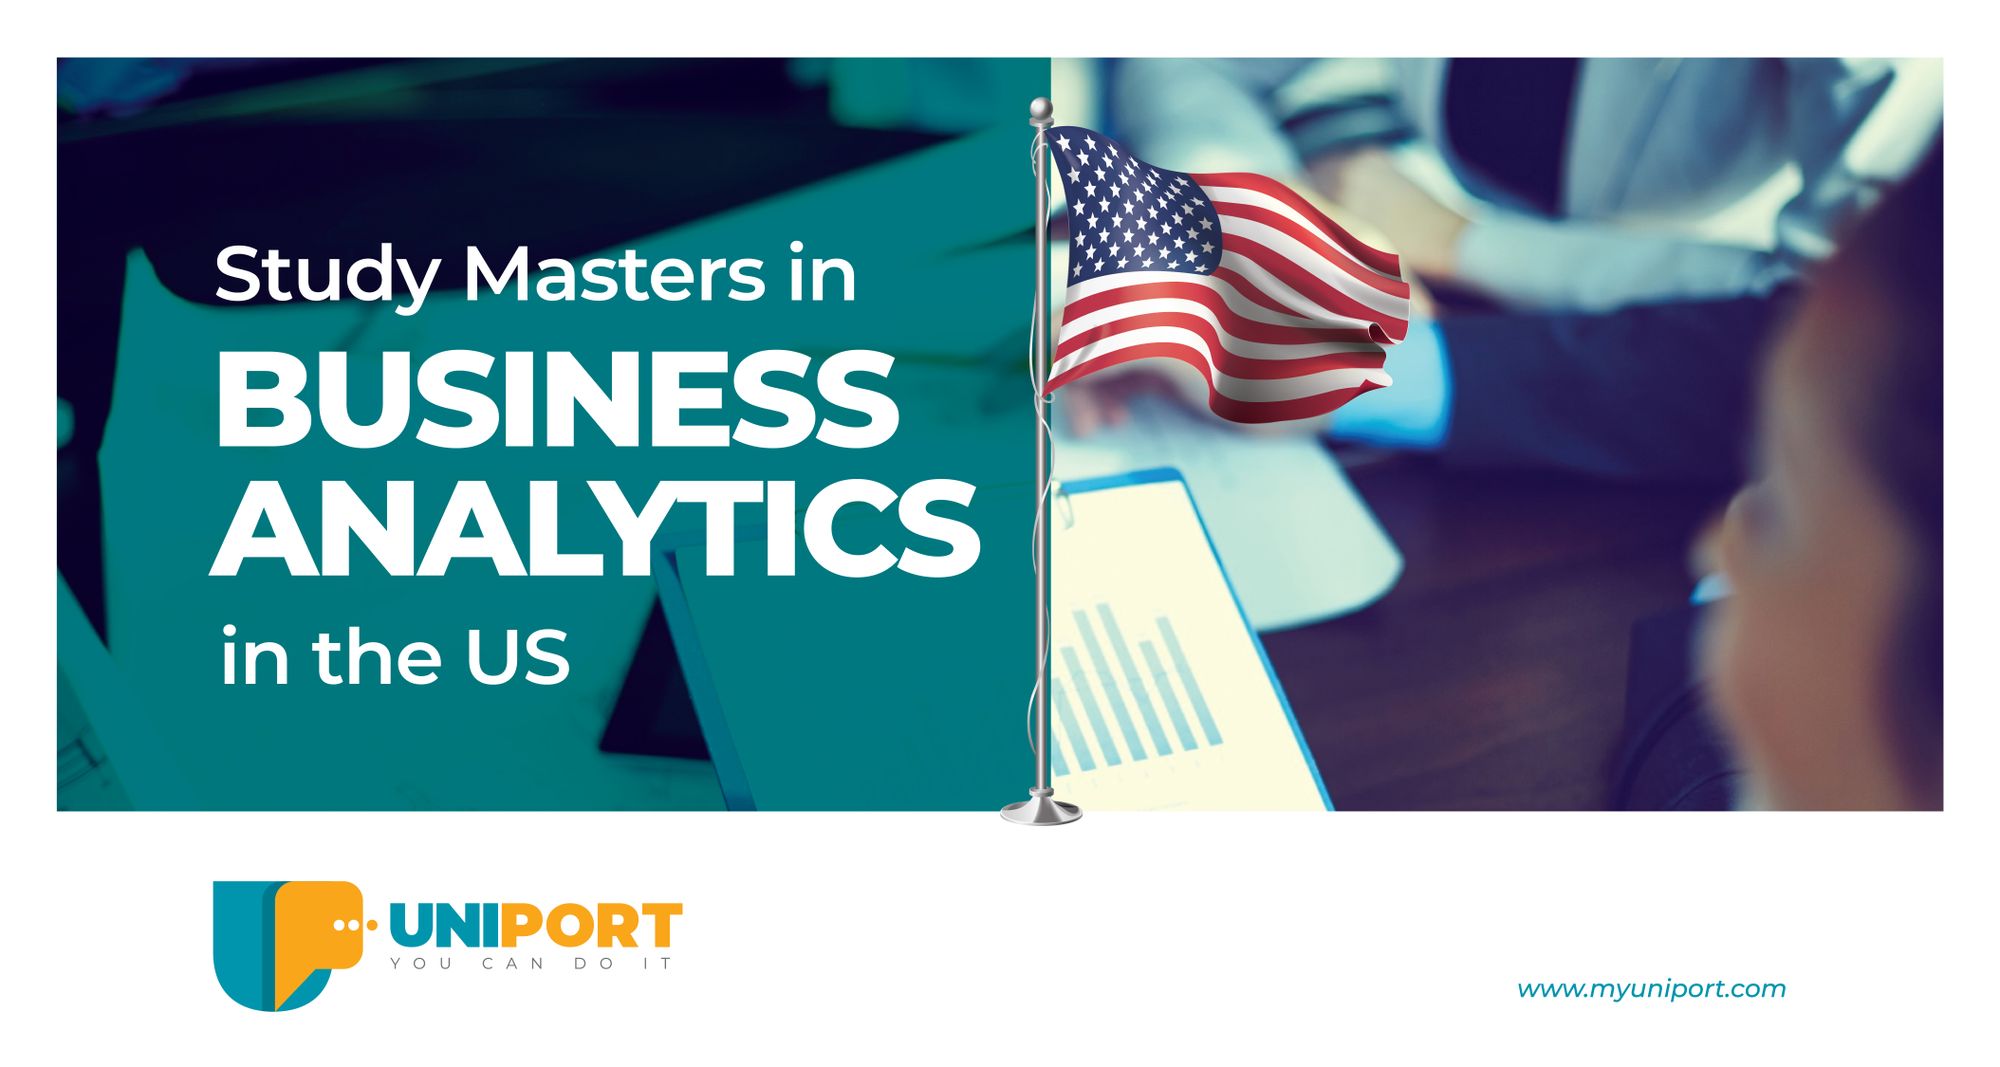 Study Masters in Business Analytics in the US